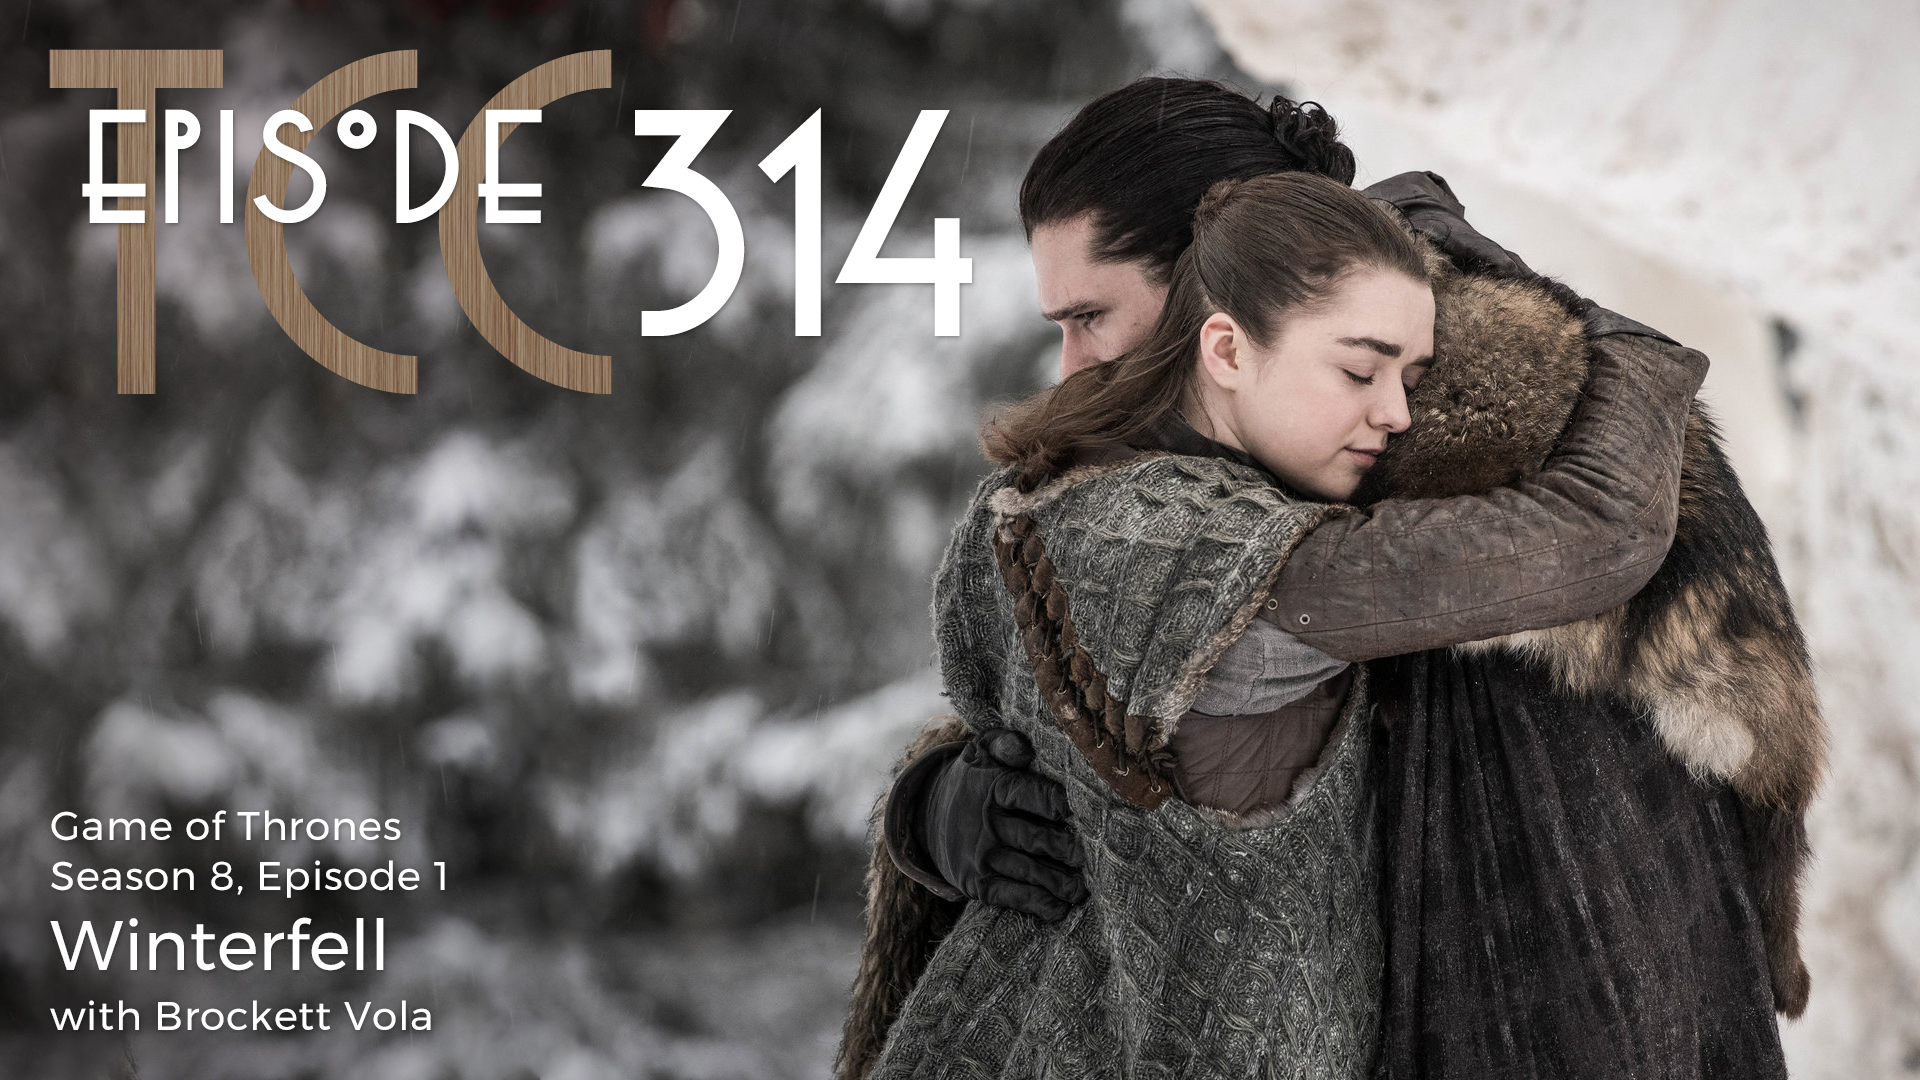 The Citadel Cafe 314: Winterfell